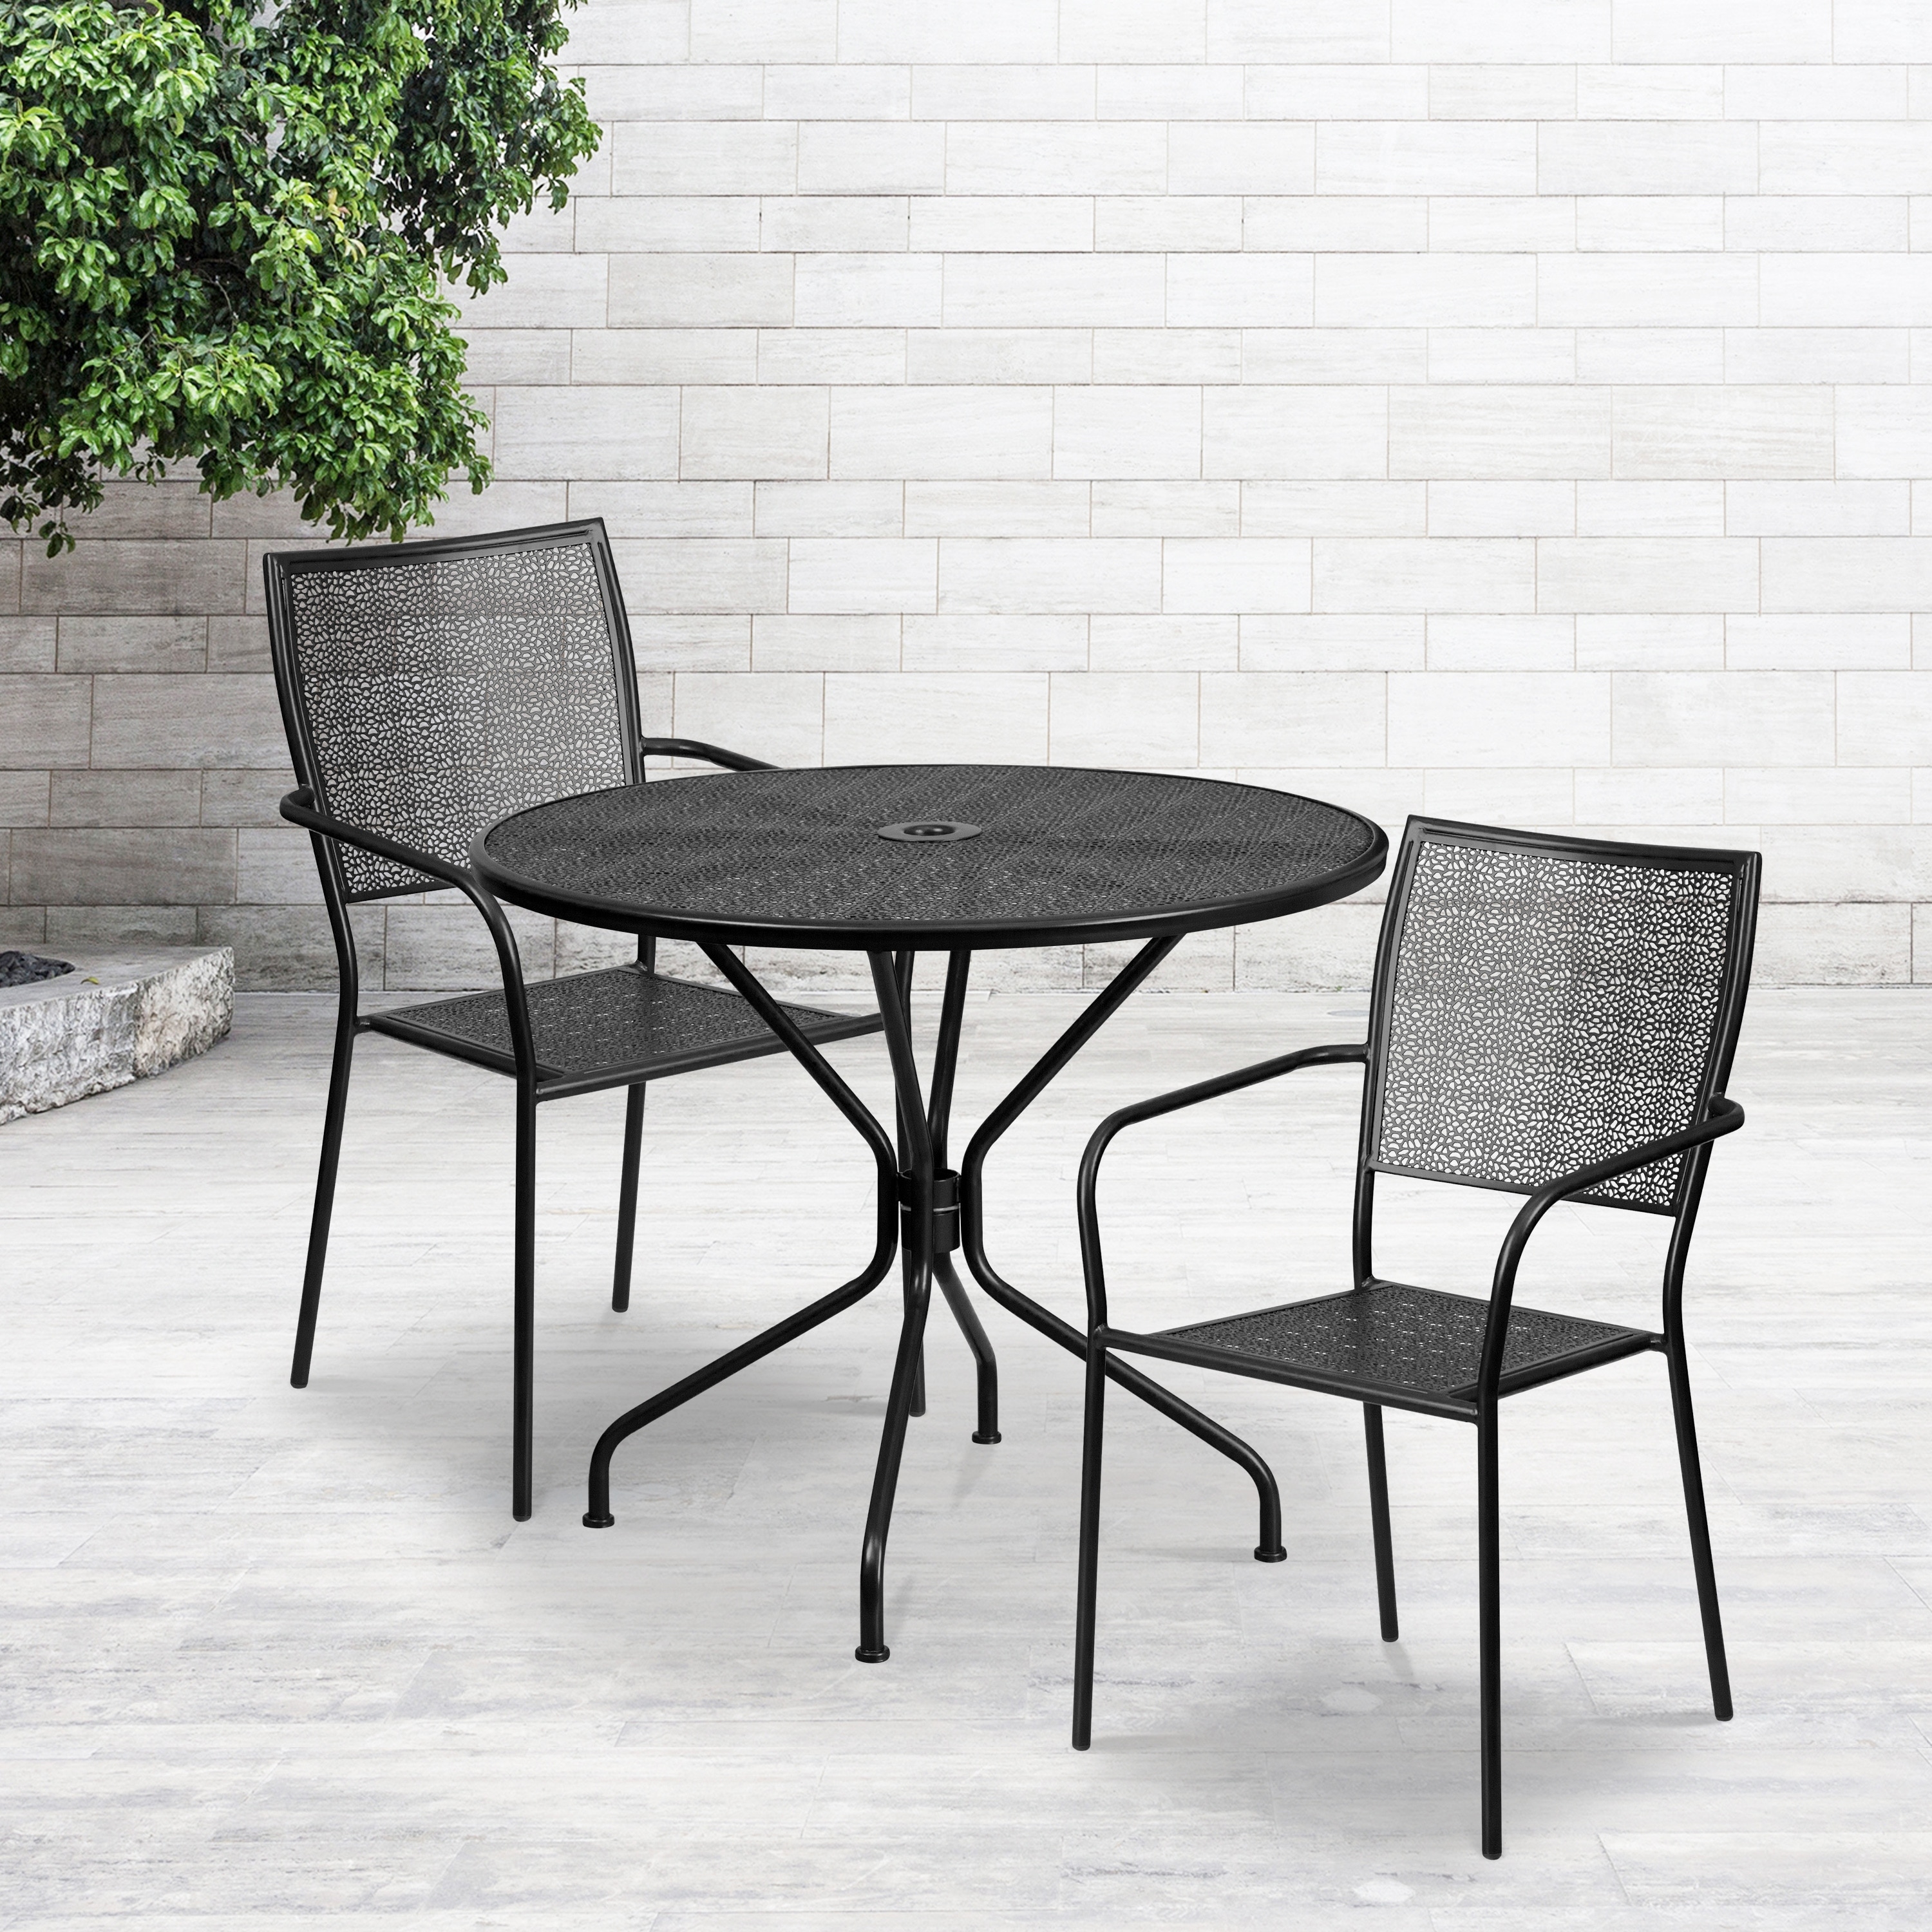 35-inch Round Steel 3-piece Patio Table Set With Square Back Chairs